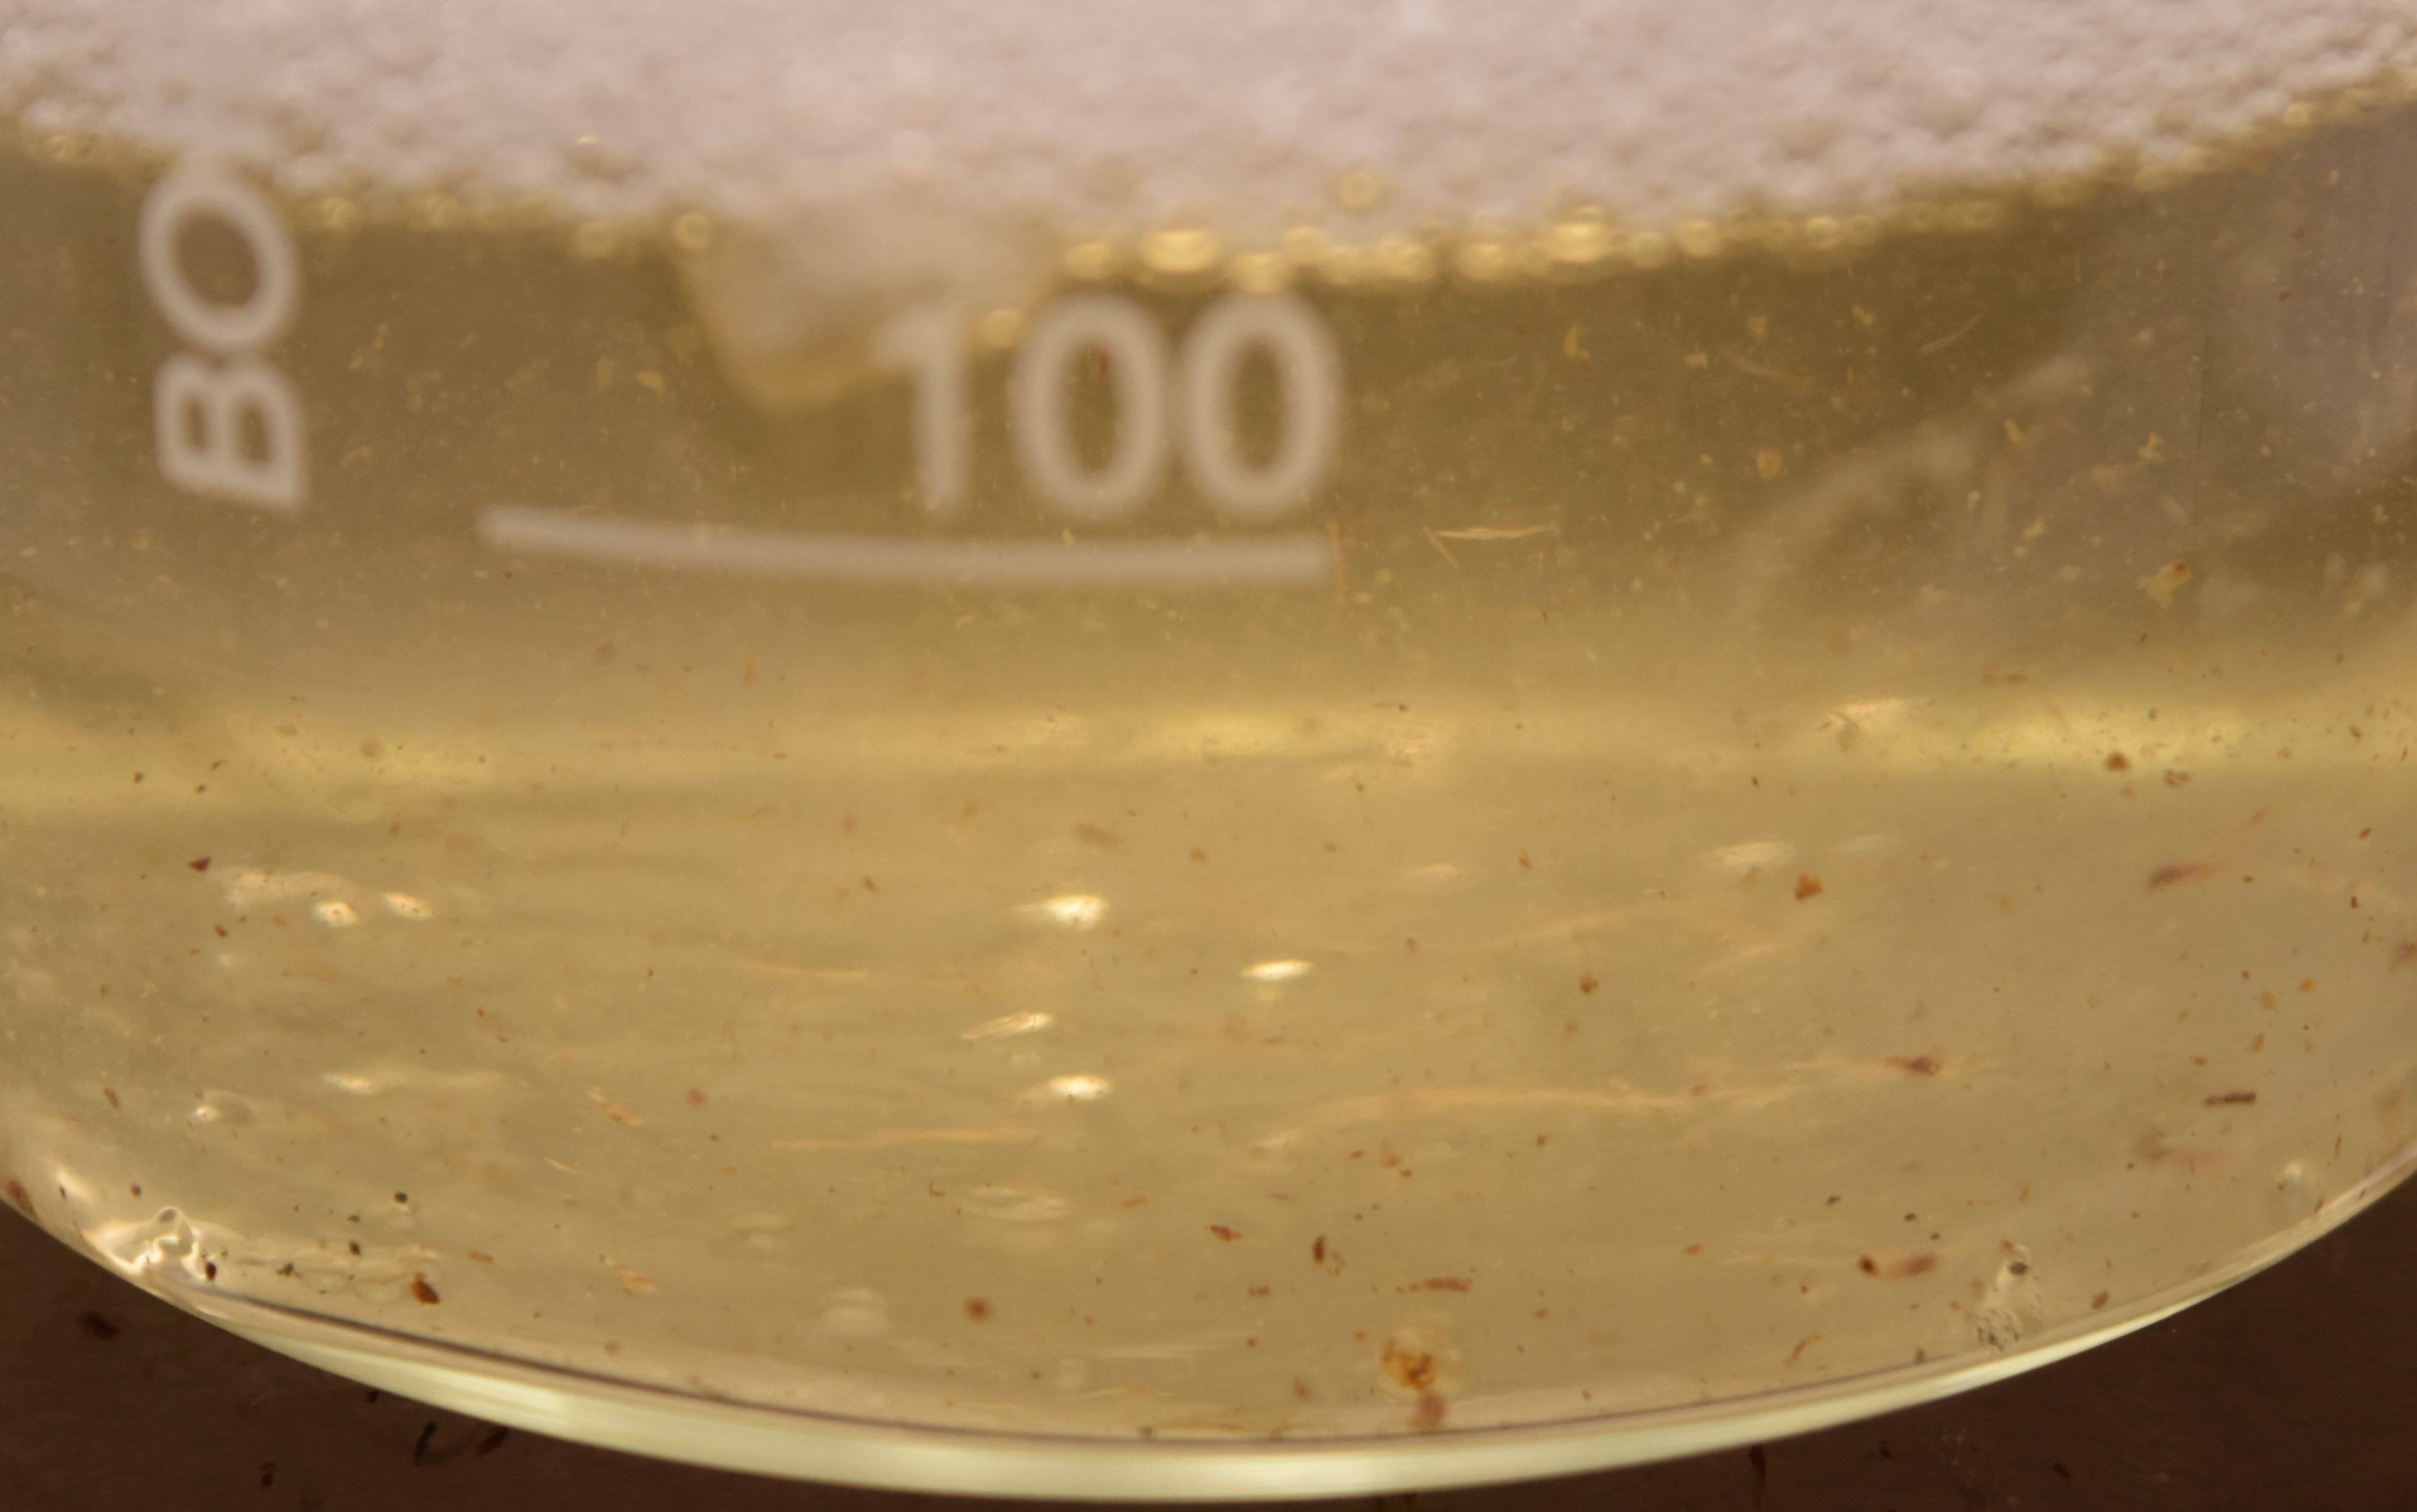 Glass container with gum arabic dissolved in water. The liquid is transparent yellow and small brown pieces are observable (impurities from the tree).